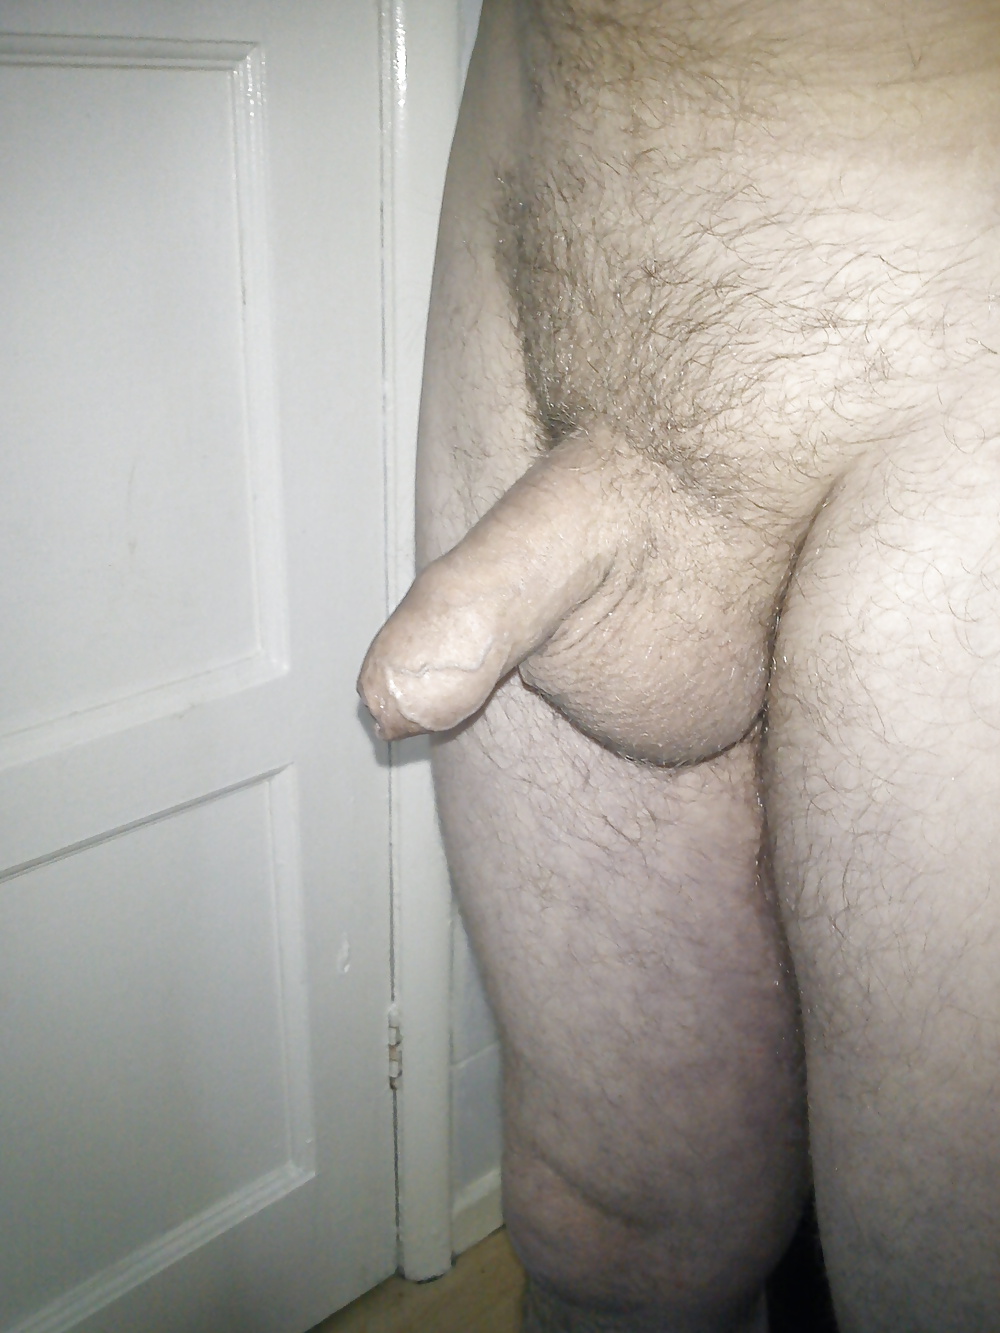 My small cock #31323987